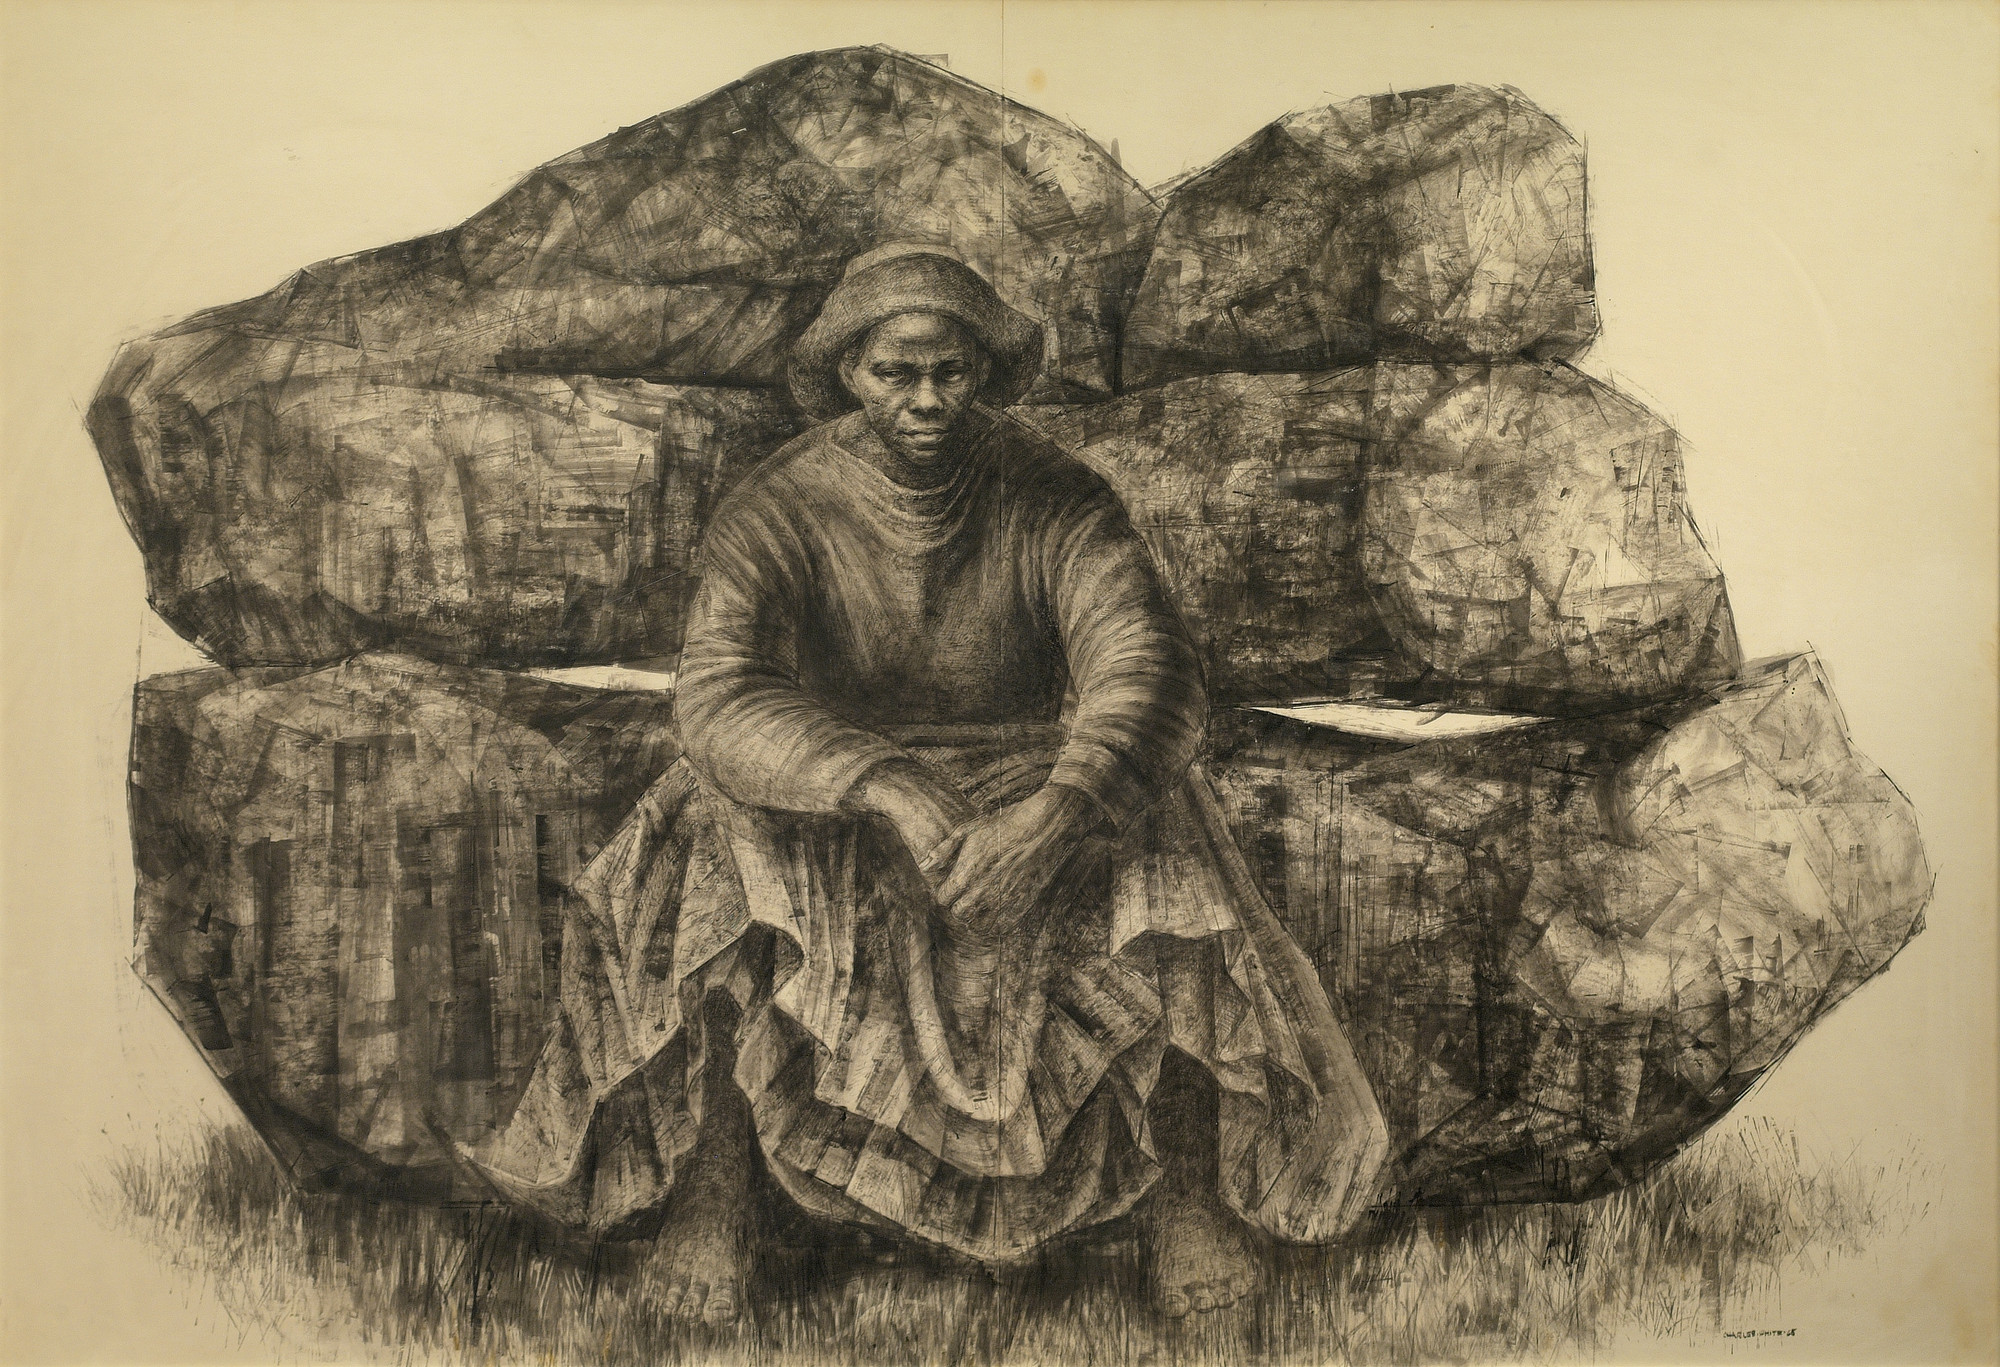 Charles White. _General Moses (Harriet Tubman)_. 1965. Ink on paper, 47 × 68" (119.4 × 172.7 cm). Private collection. © The Charles White Archives/ Courtesy of Swann Auction Galleries